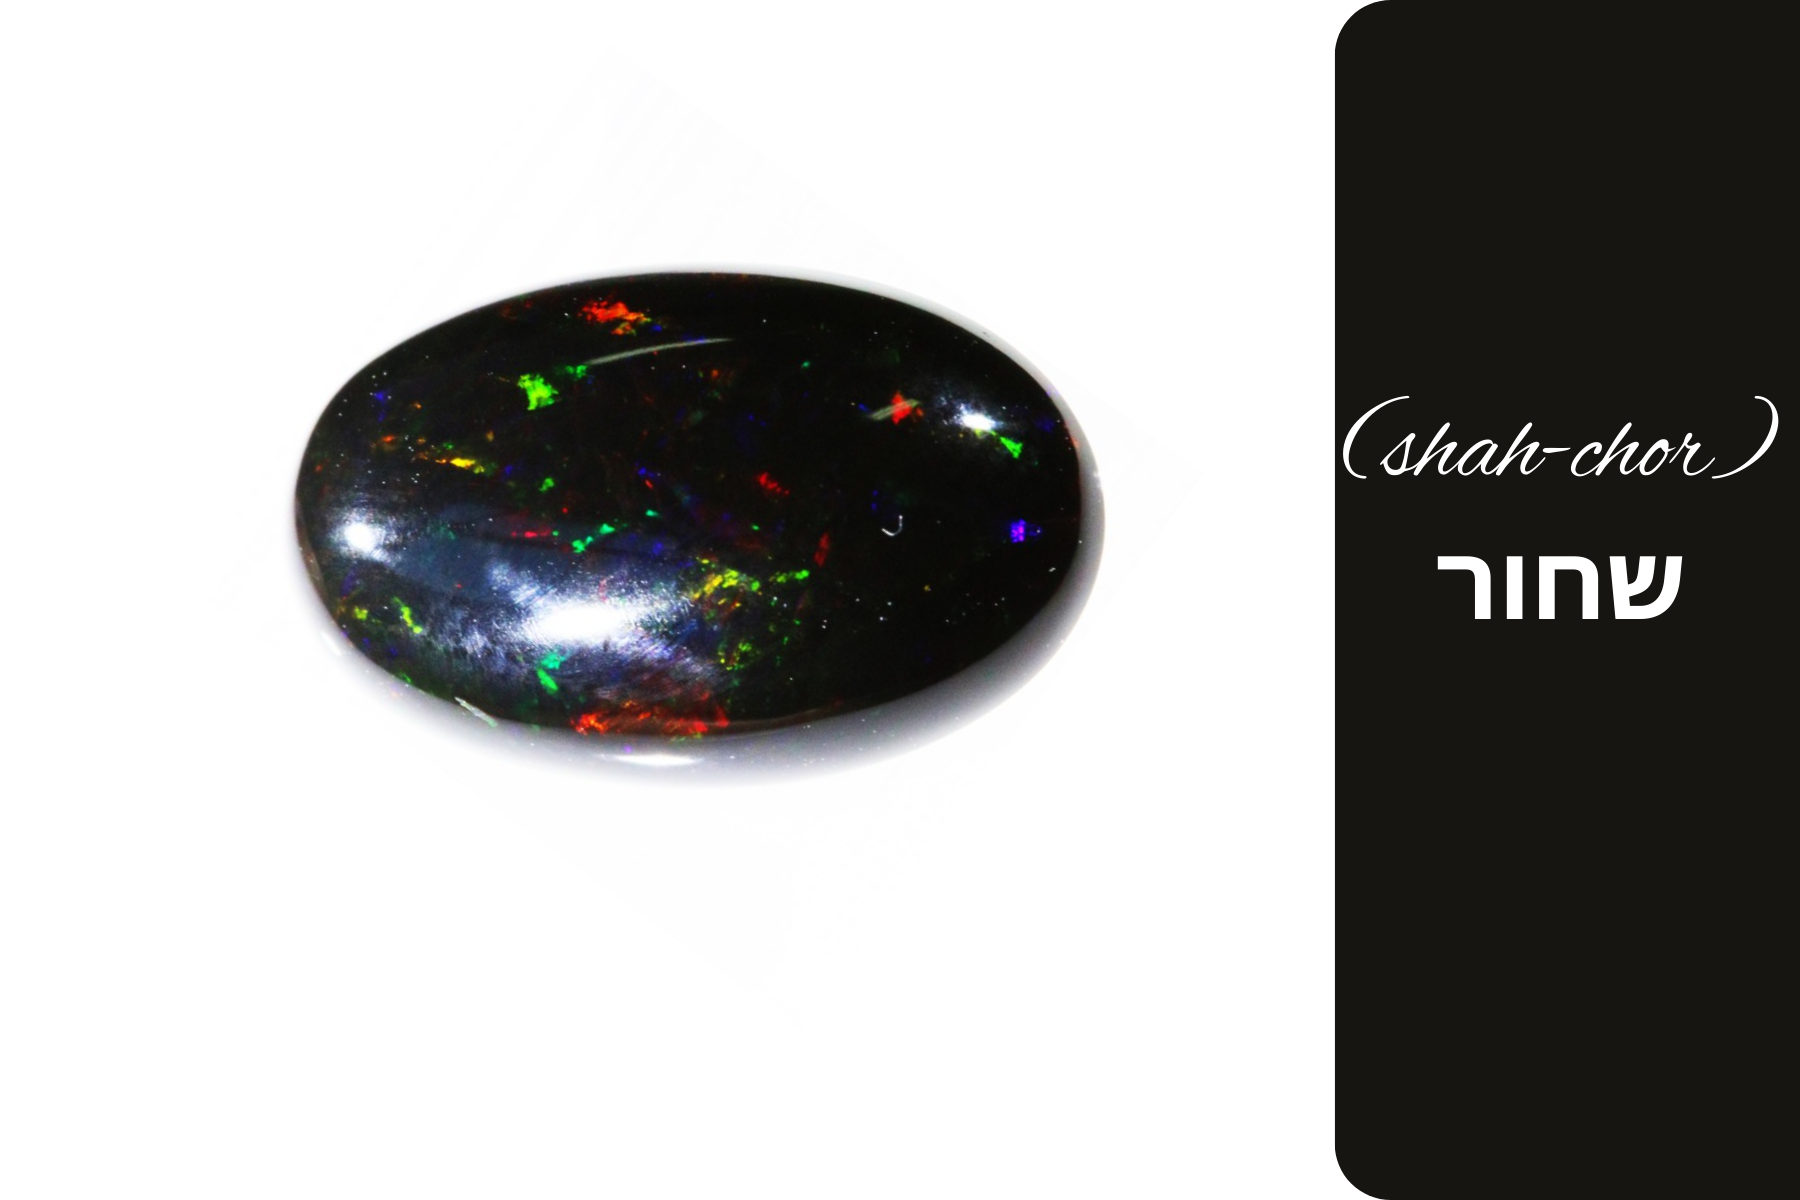 The gemstone known as a black opal with its Hebrew name